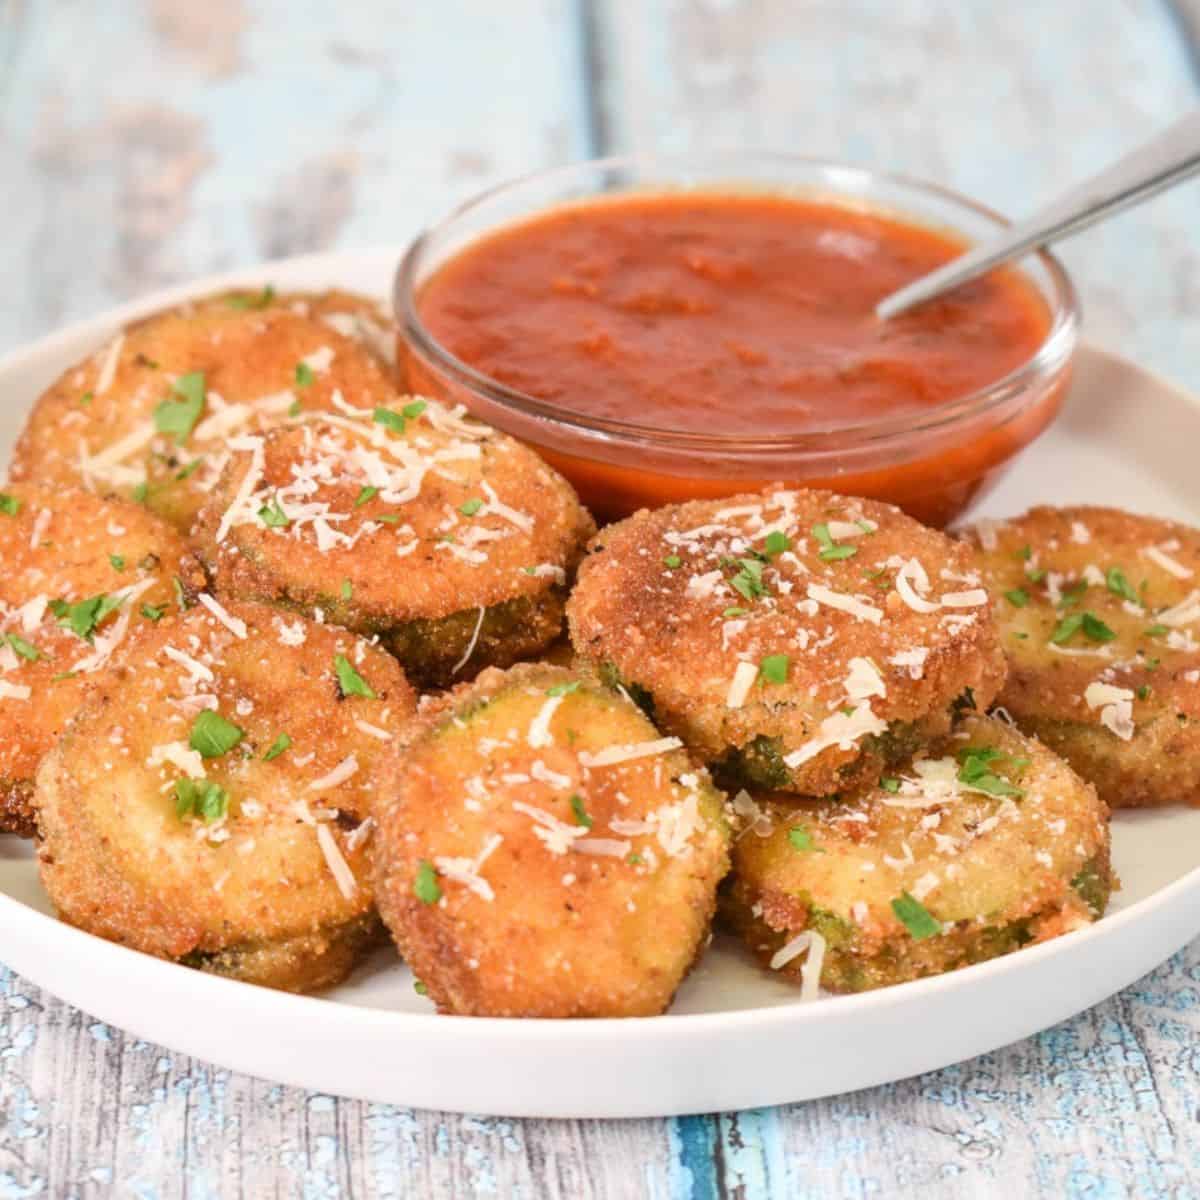 Fried zucchini rounds arranged on a white plate with a small bowl of marinara sauce.